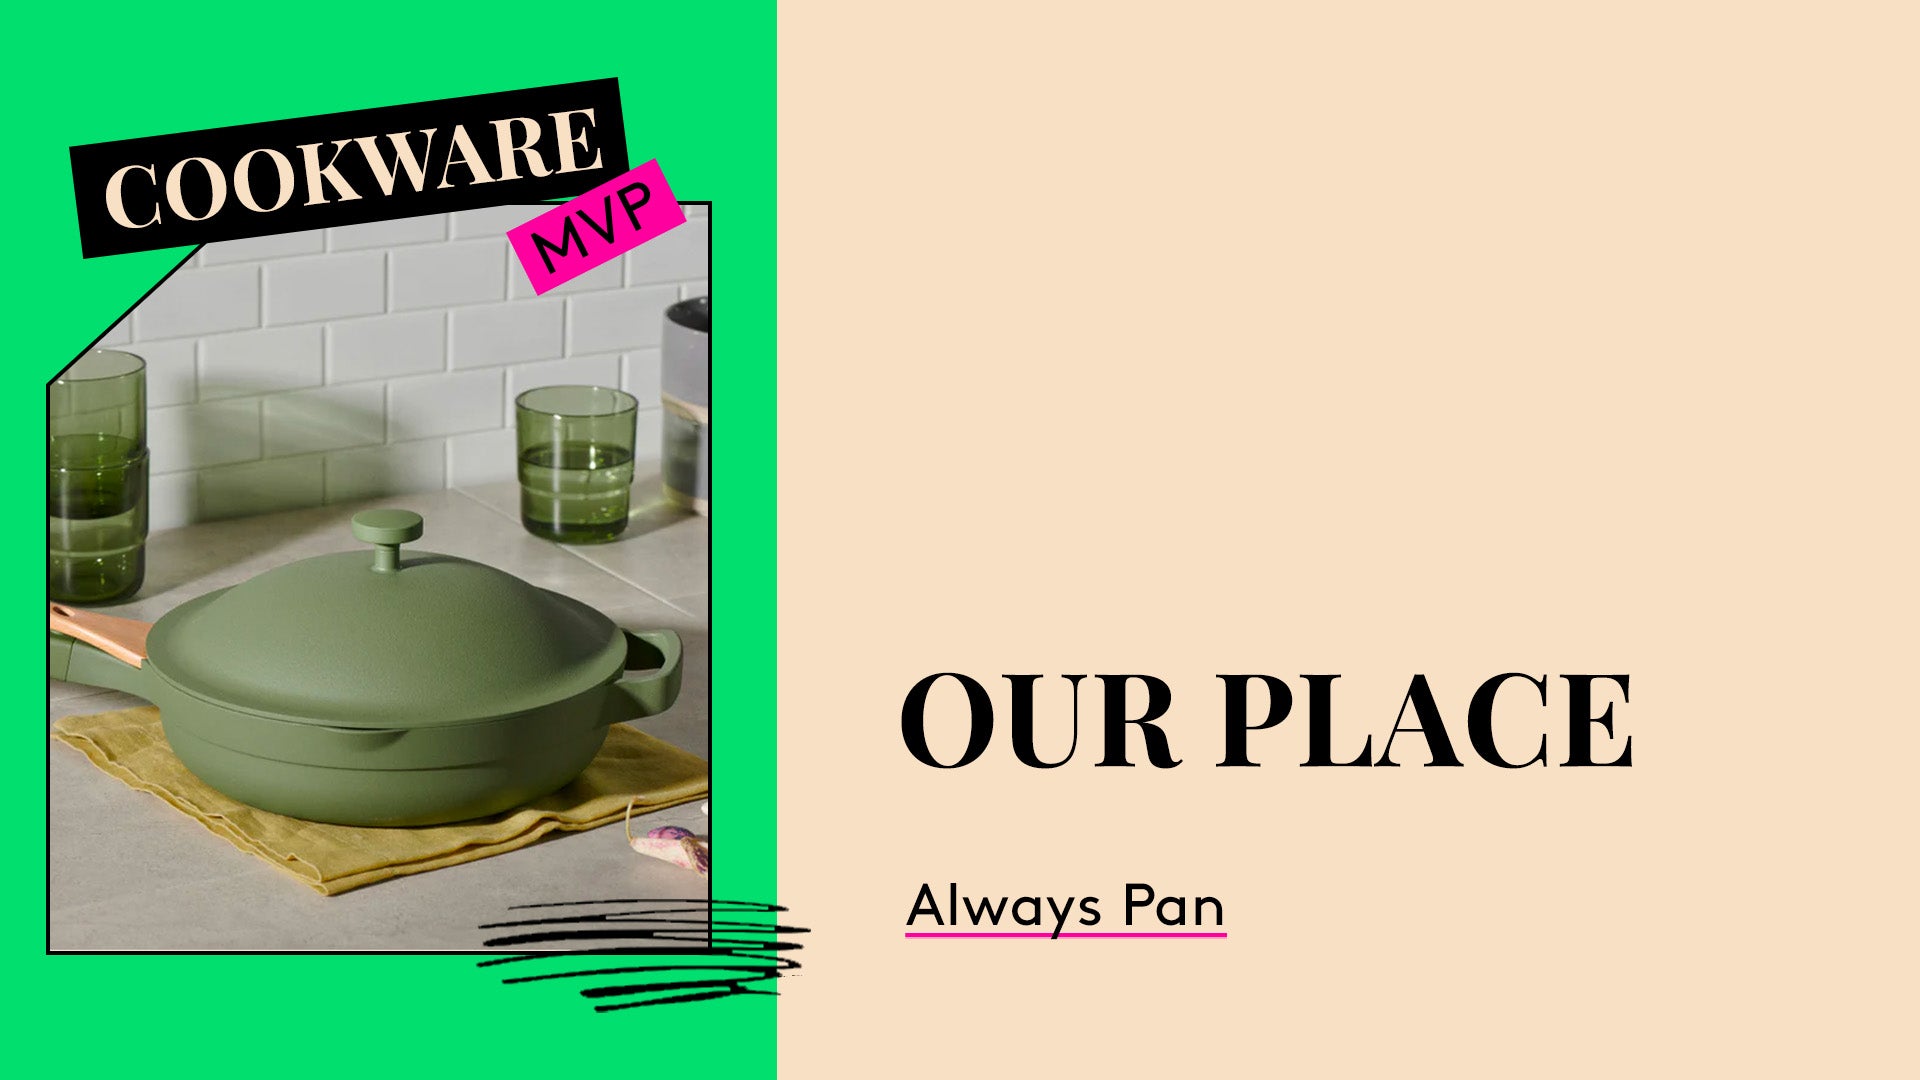 Cookware MVP. Our Place Always Pan.